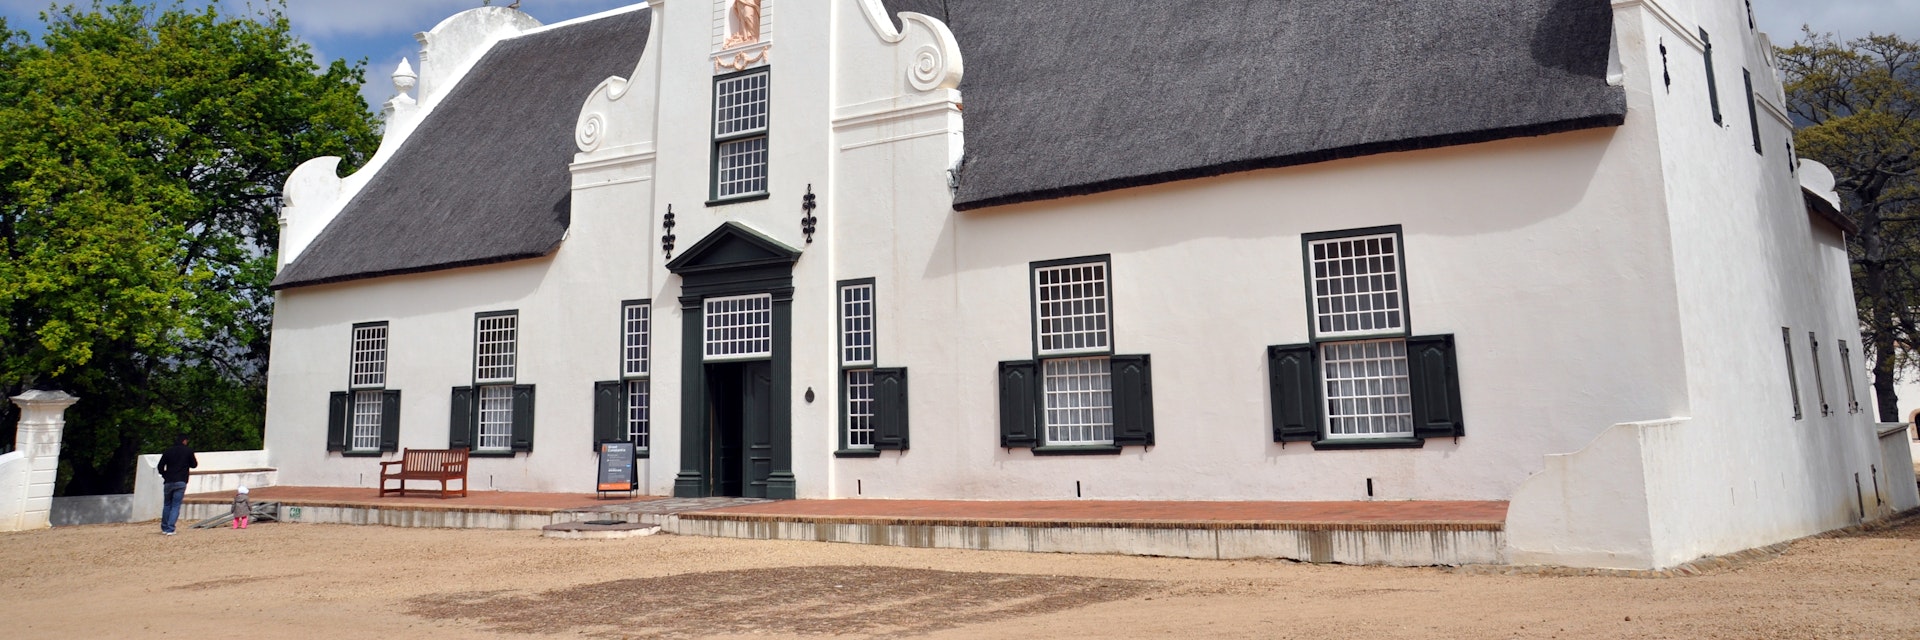 Groot Constantia manor house in Cape Town, South Africa.